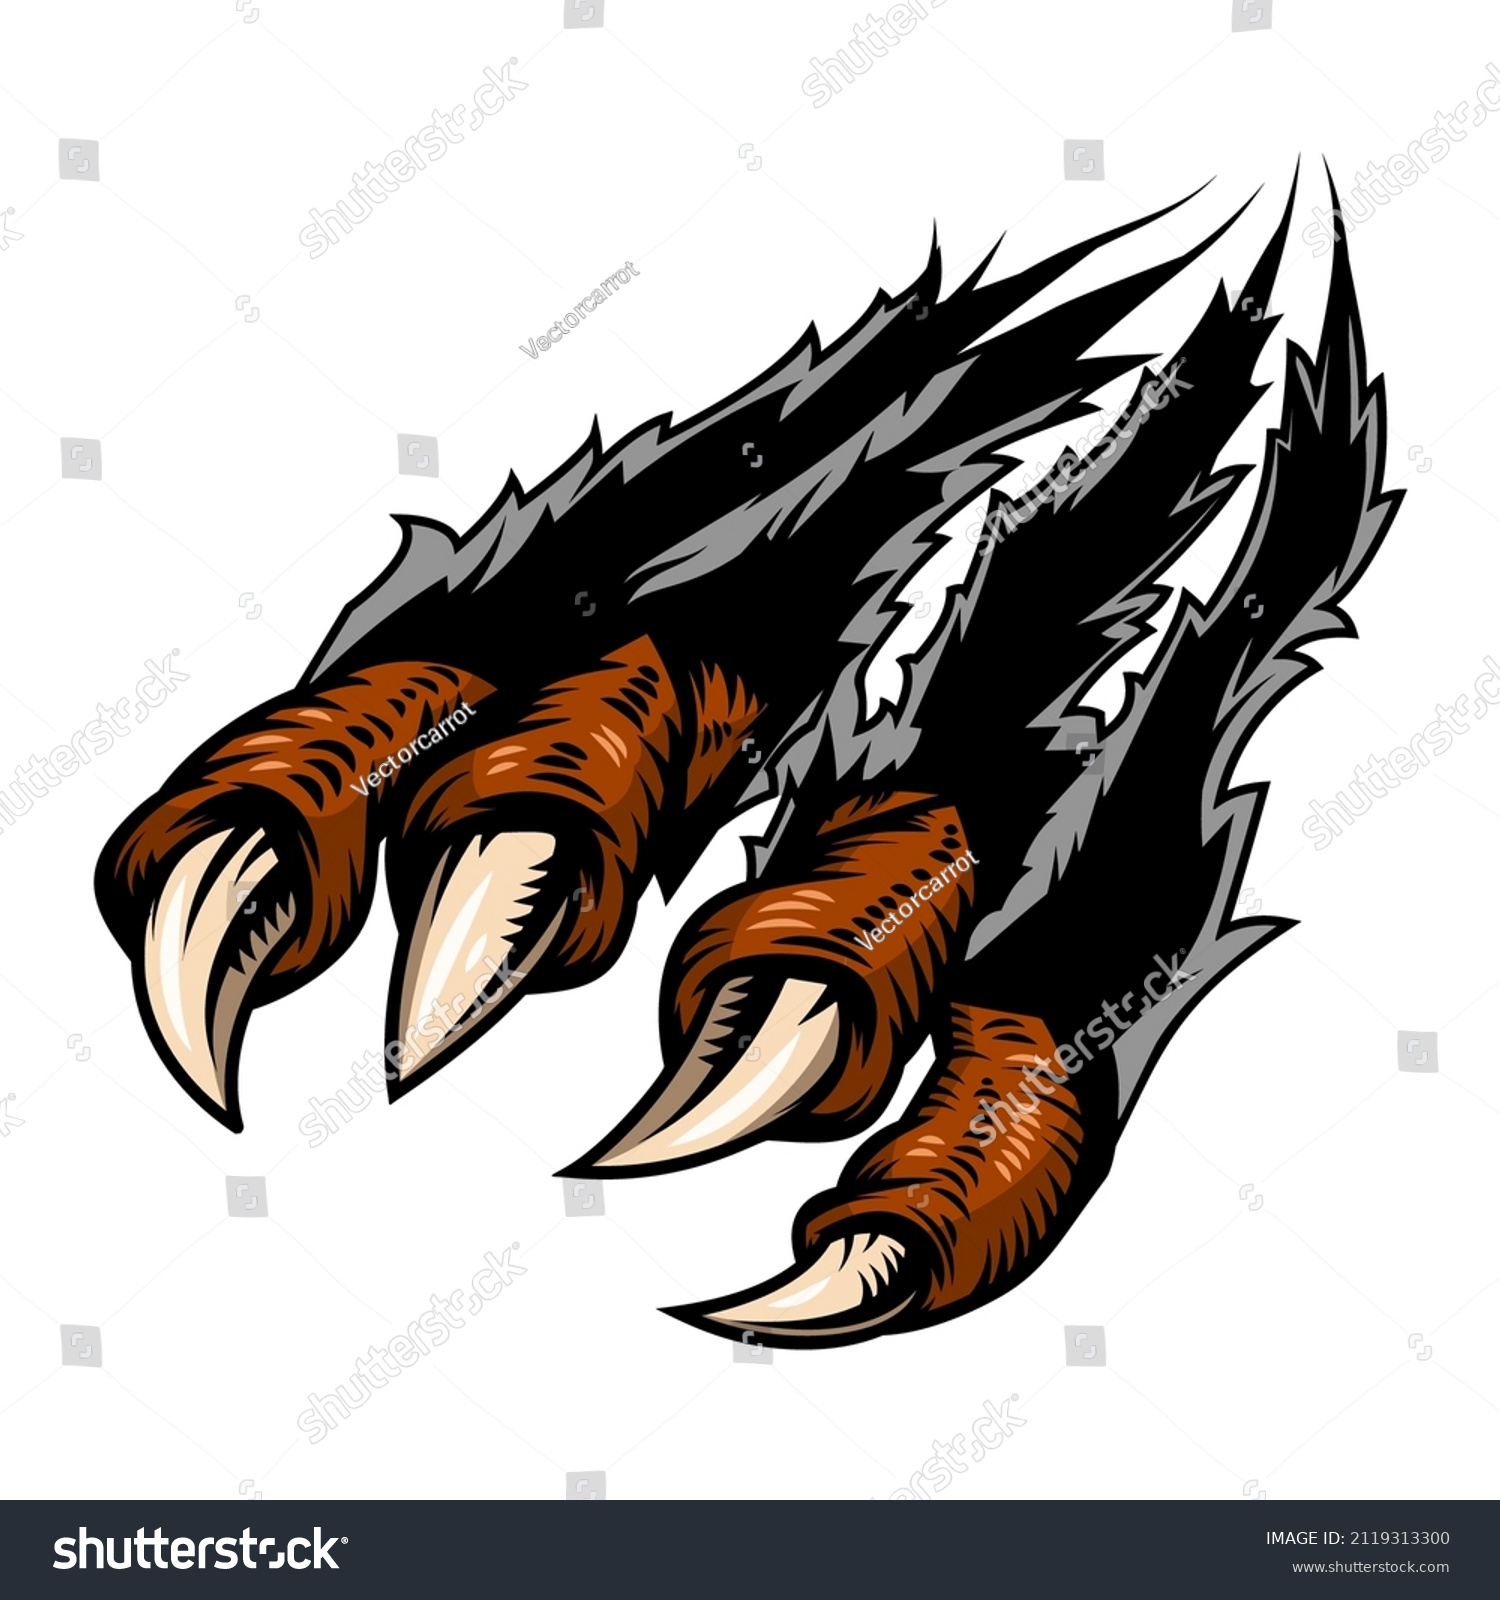 Monster Claws Scratching Background Poster T Stock Vector (Royalty Free ...